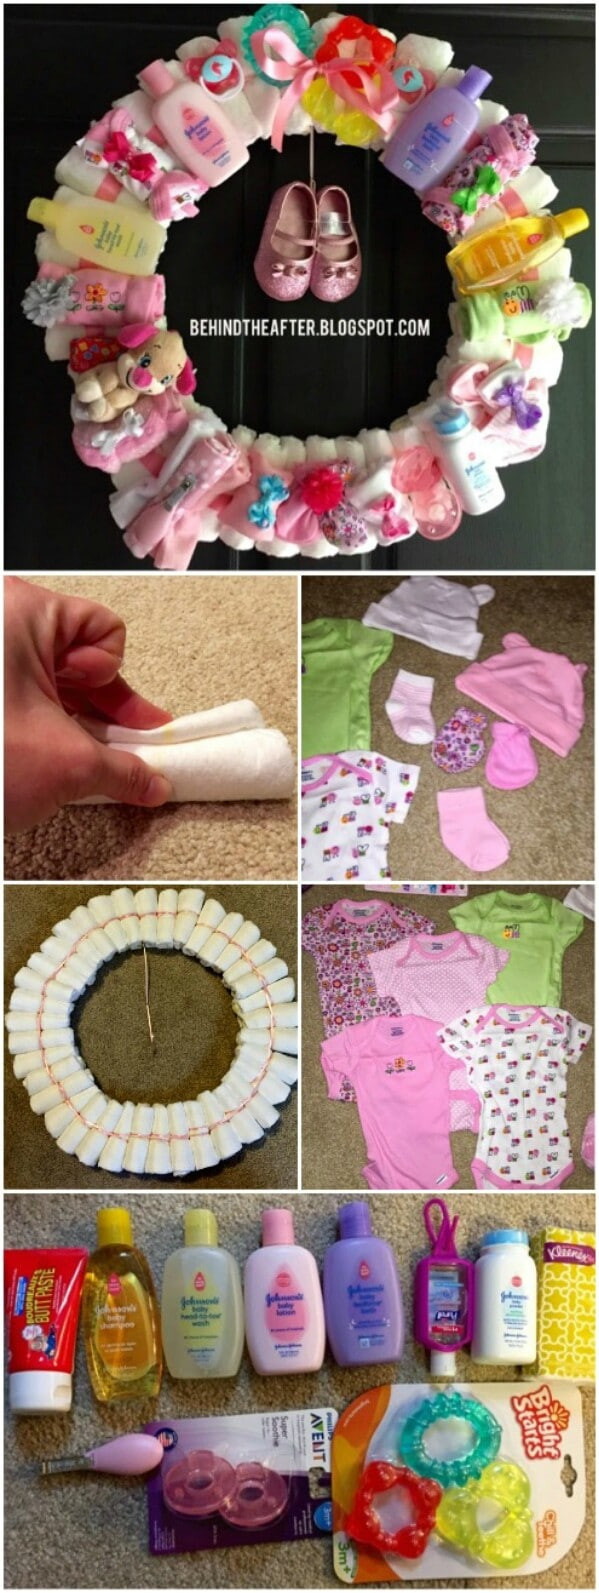 Baby Girl Shower Gift Ideas
 25 Enchantingly Adorable Baby Shower Gift Ideas That Will